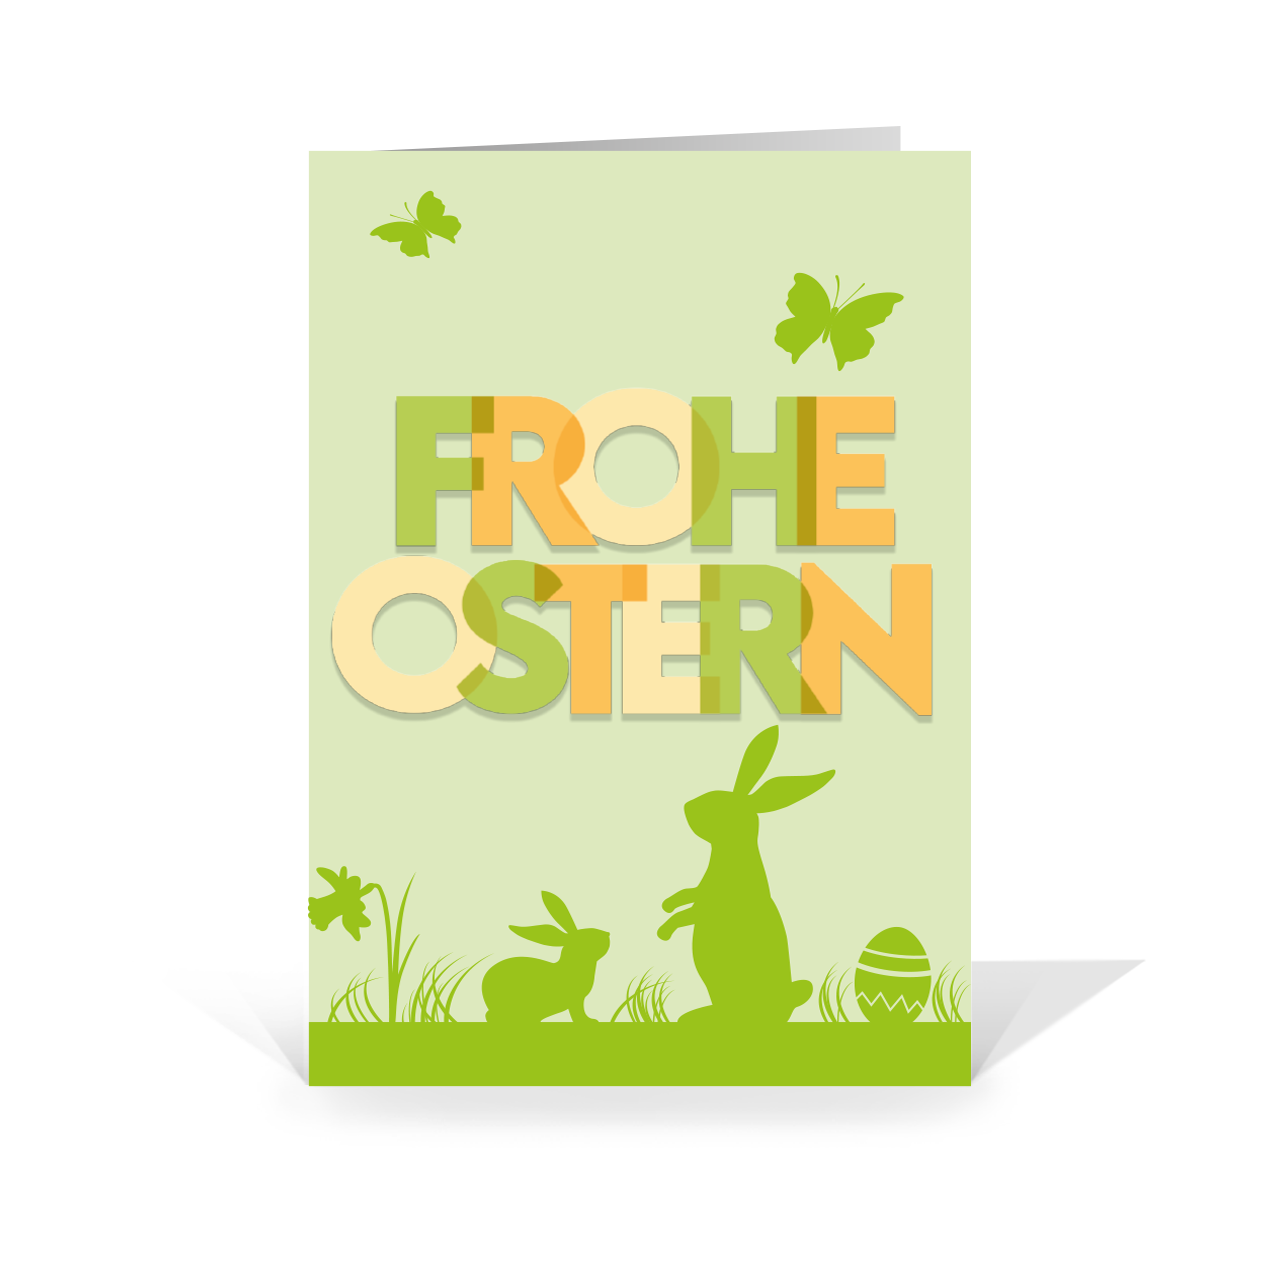 Farbenfrohe Ostern